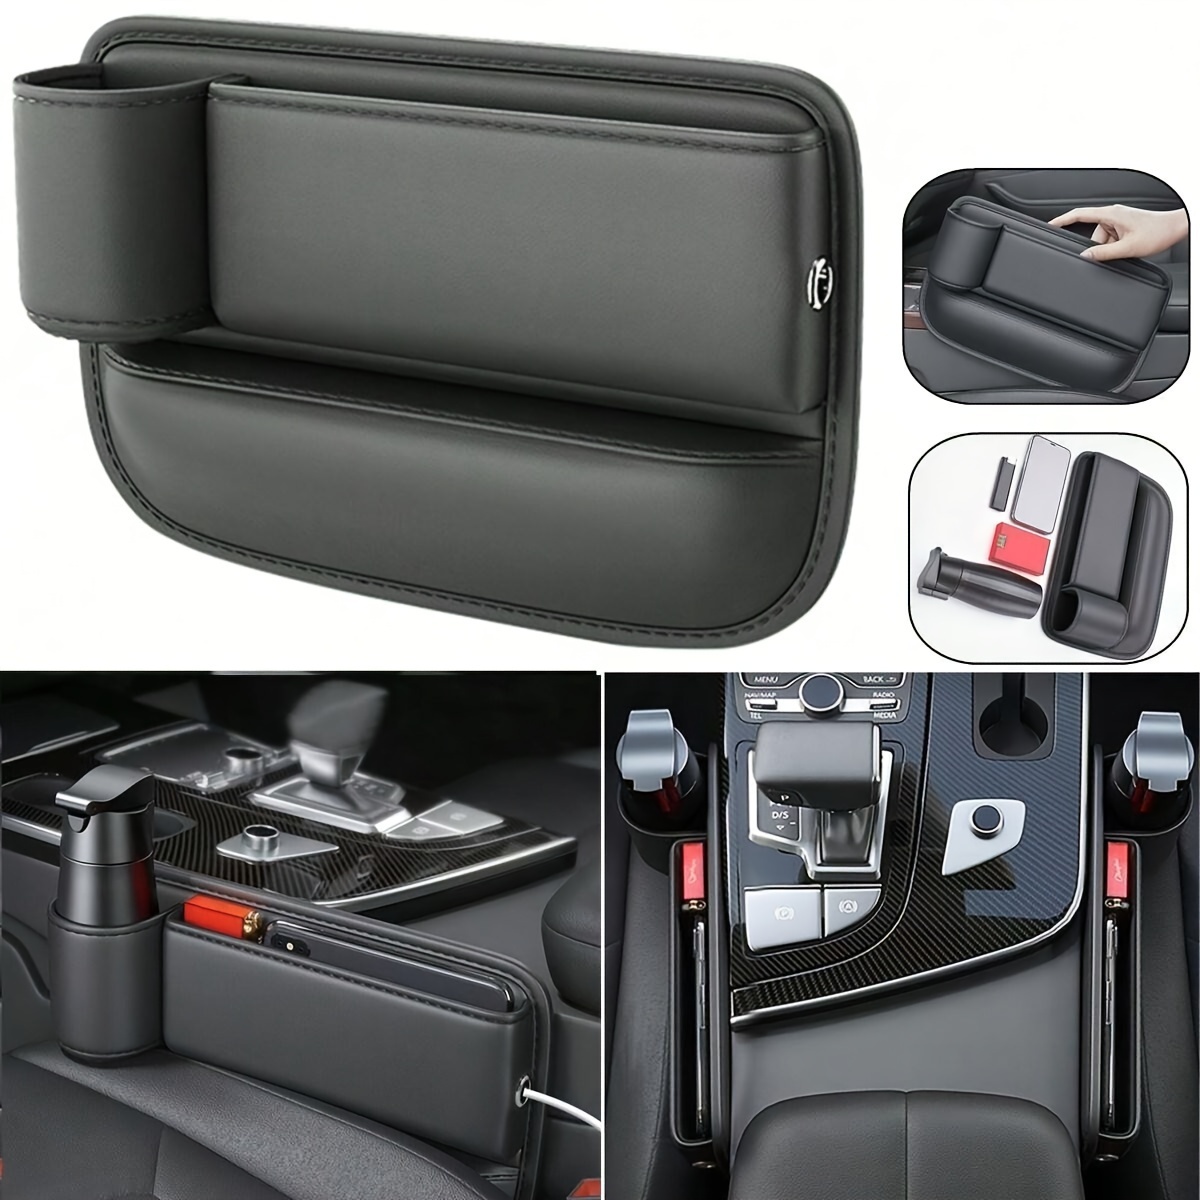 

1 Count Multifunction Car Seat Gap Storage Bag For Car Seat Gap Filler With Phone Cup Holder Pu Leather Car Seat Slot Organizer Box Leak-proof Storage Bags For Phones Glasses Keys Cards